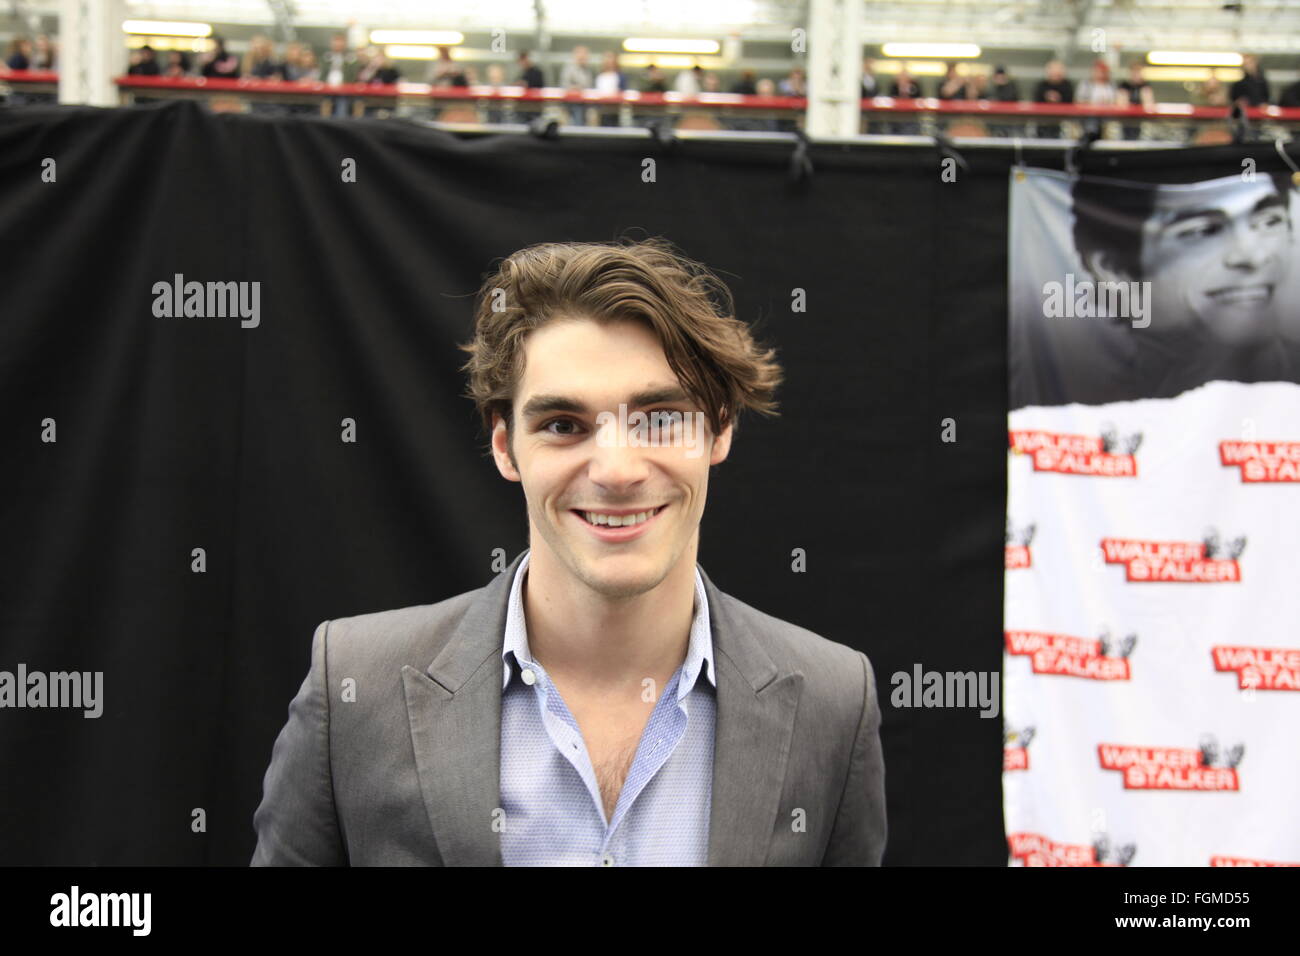 RJ Mitte breaking bad actor TV star Walt Junior in London, UK. 21st February, 2016. Walking Dead Convention Walker Stalker Con Olympia London 21/02/2016  London, UK. 21st February, 2016. Walking Dead Convention Walker Stalker Con Olympia London 21/02/2016 walking dead fans gather to see stars of the show and stalls selling everything to do with the hit zombie American show photo ops with a star or zombie. cosplayers & undead walkers roaming the event floor entertaining the crowds. Stalls selling make-up and characters from the show. Credit:  Paul Thompson/Alamy Live News Stock Photo